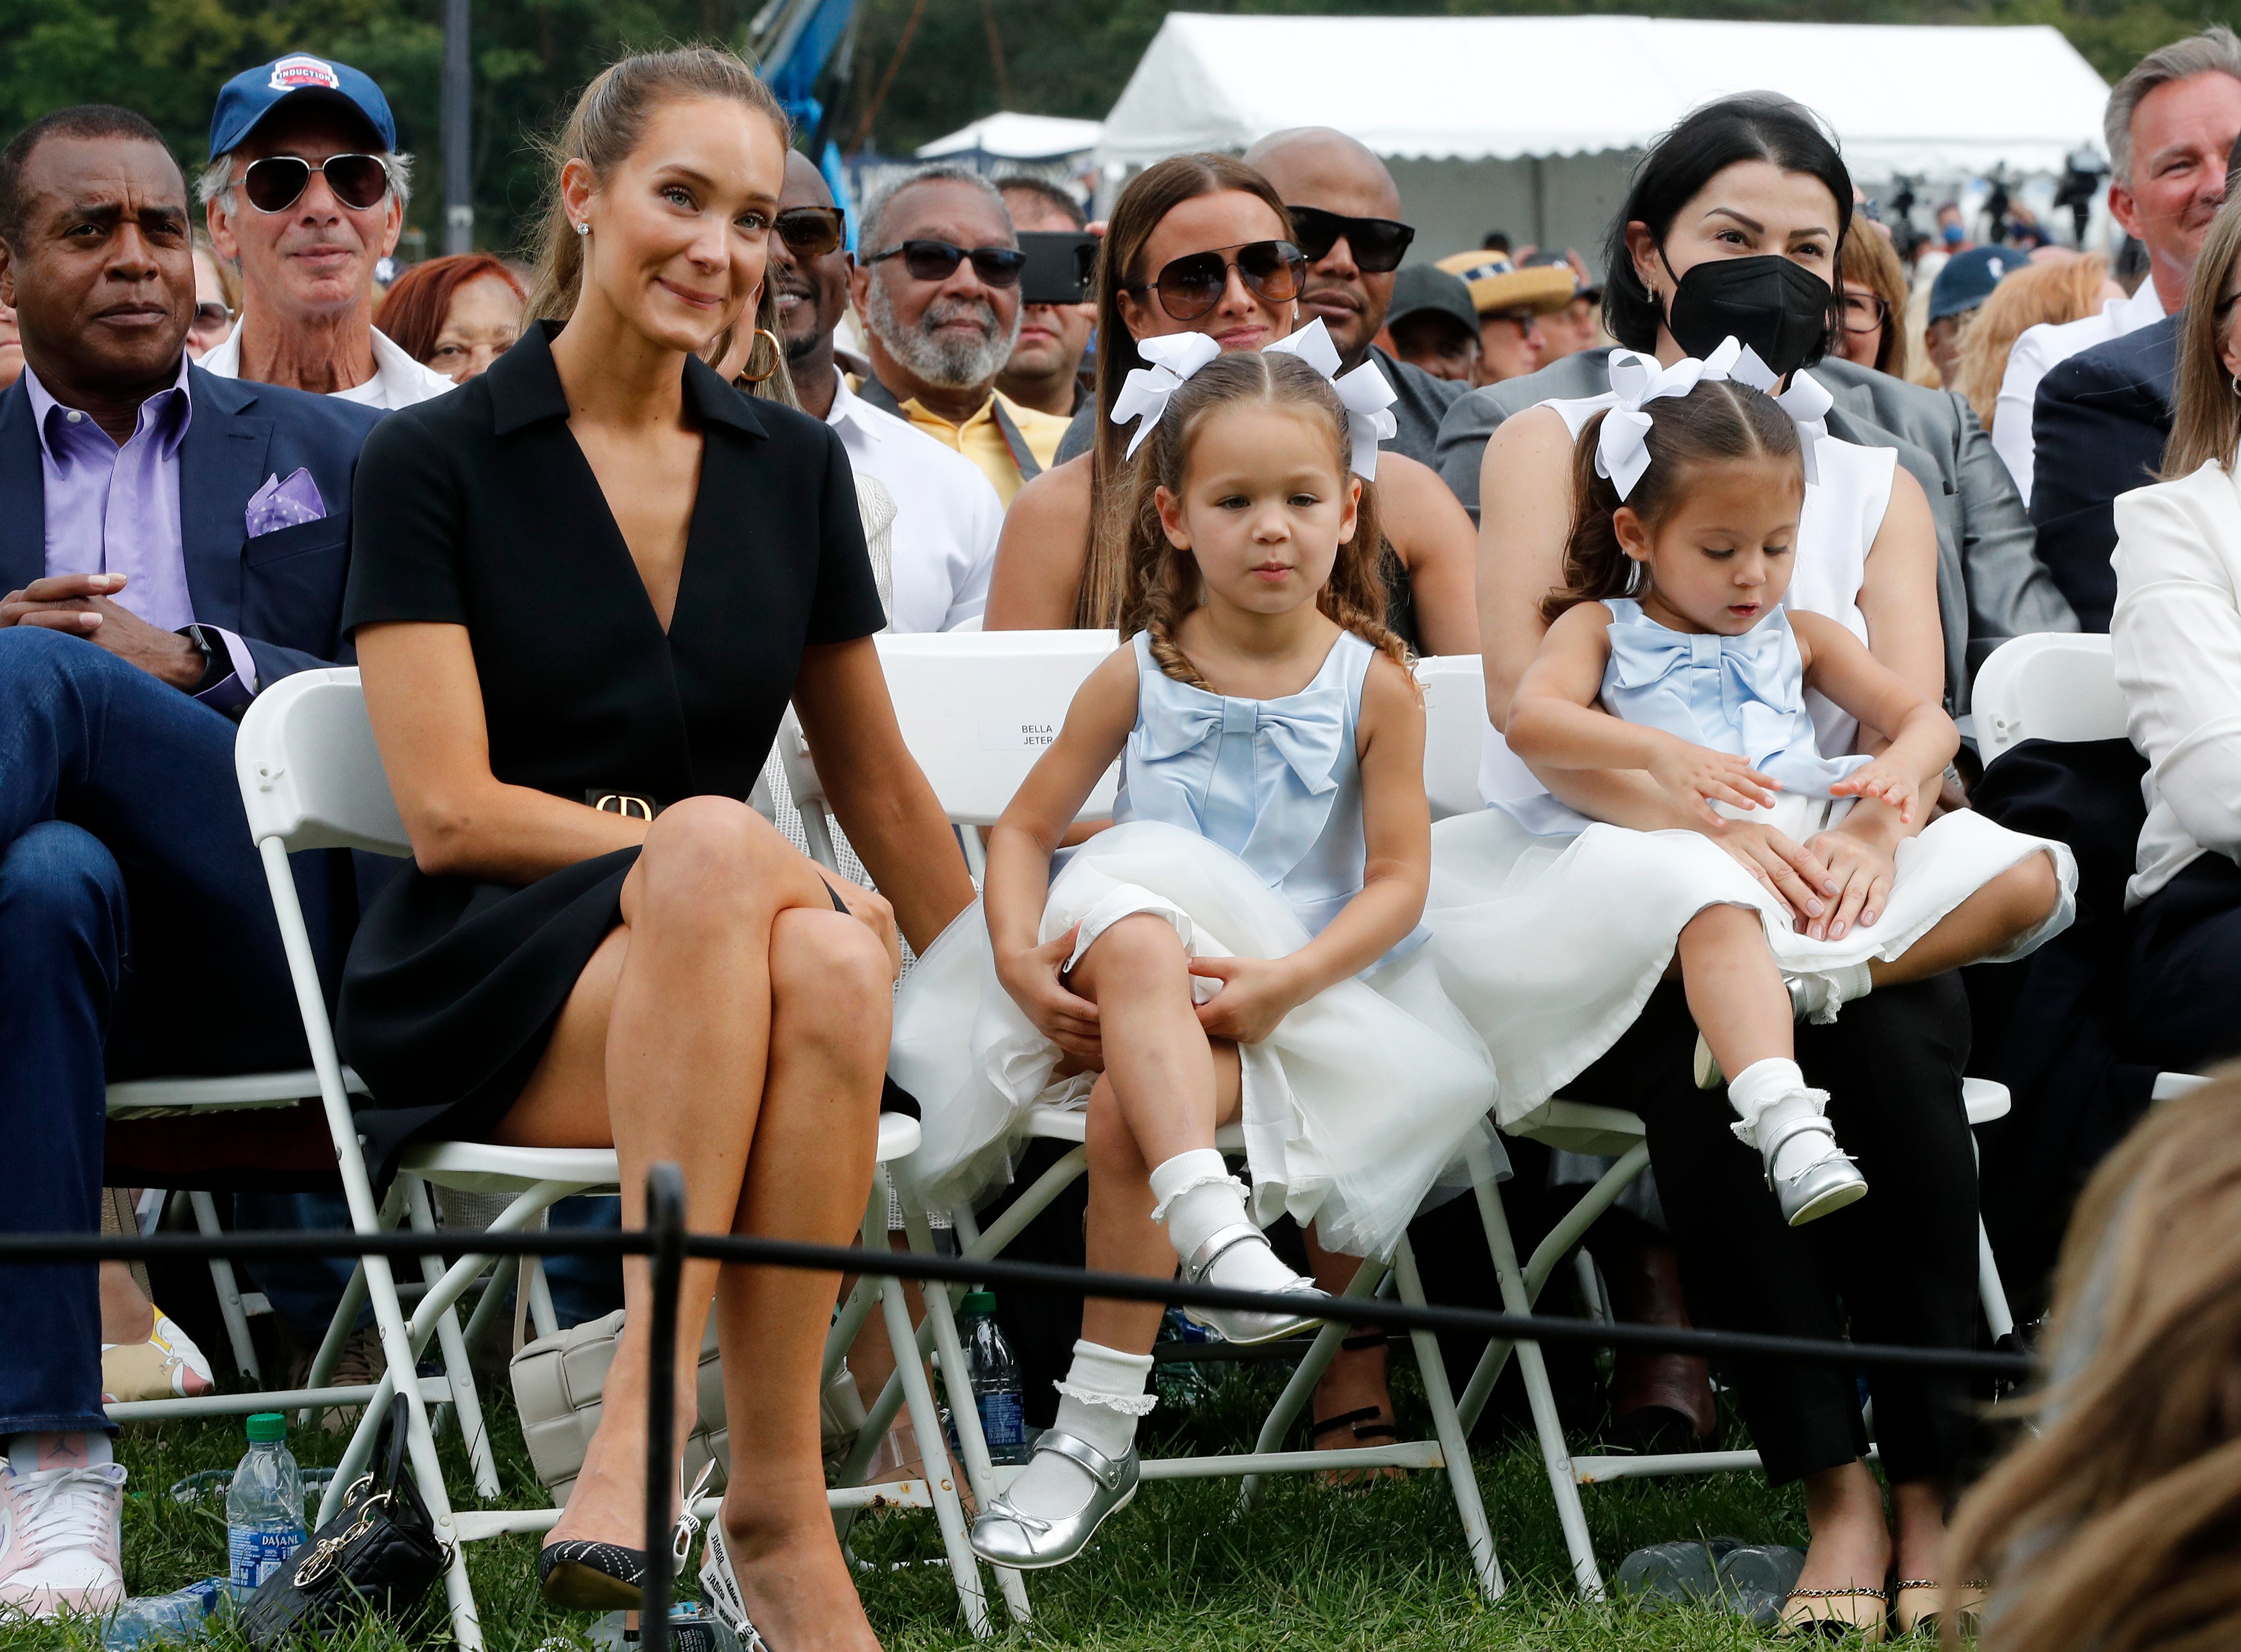 Hannah Jeter attends Derek Jeter's  Baseball Hall of Fame induction ceremony with their children Bella and Story